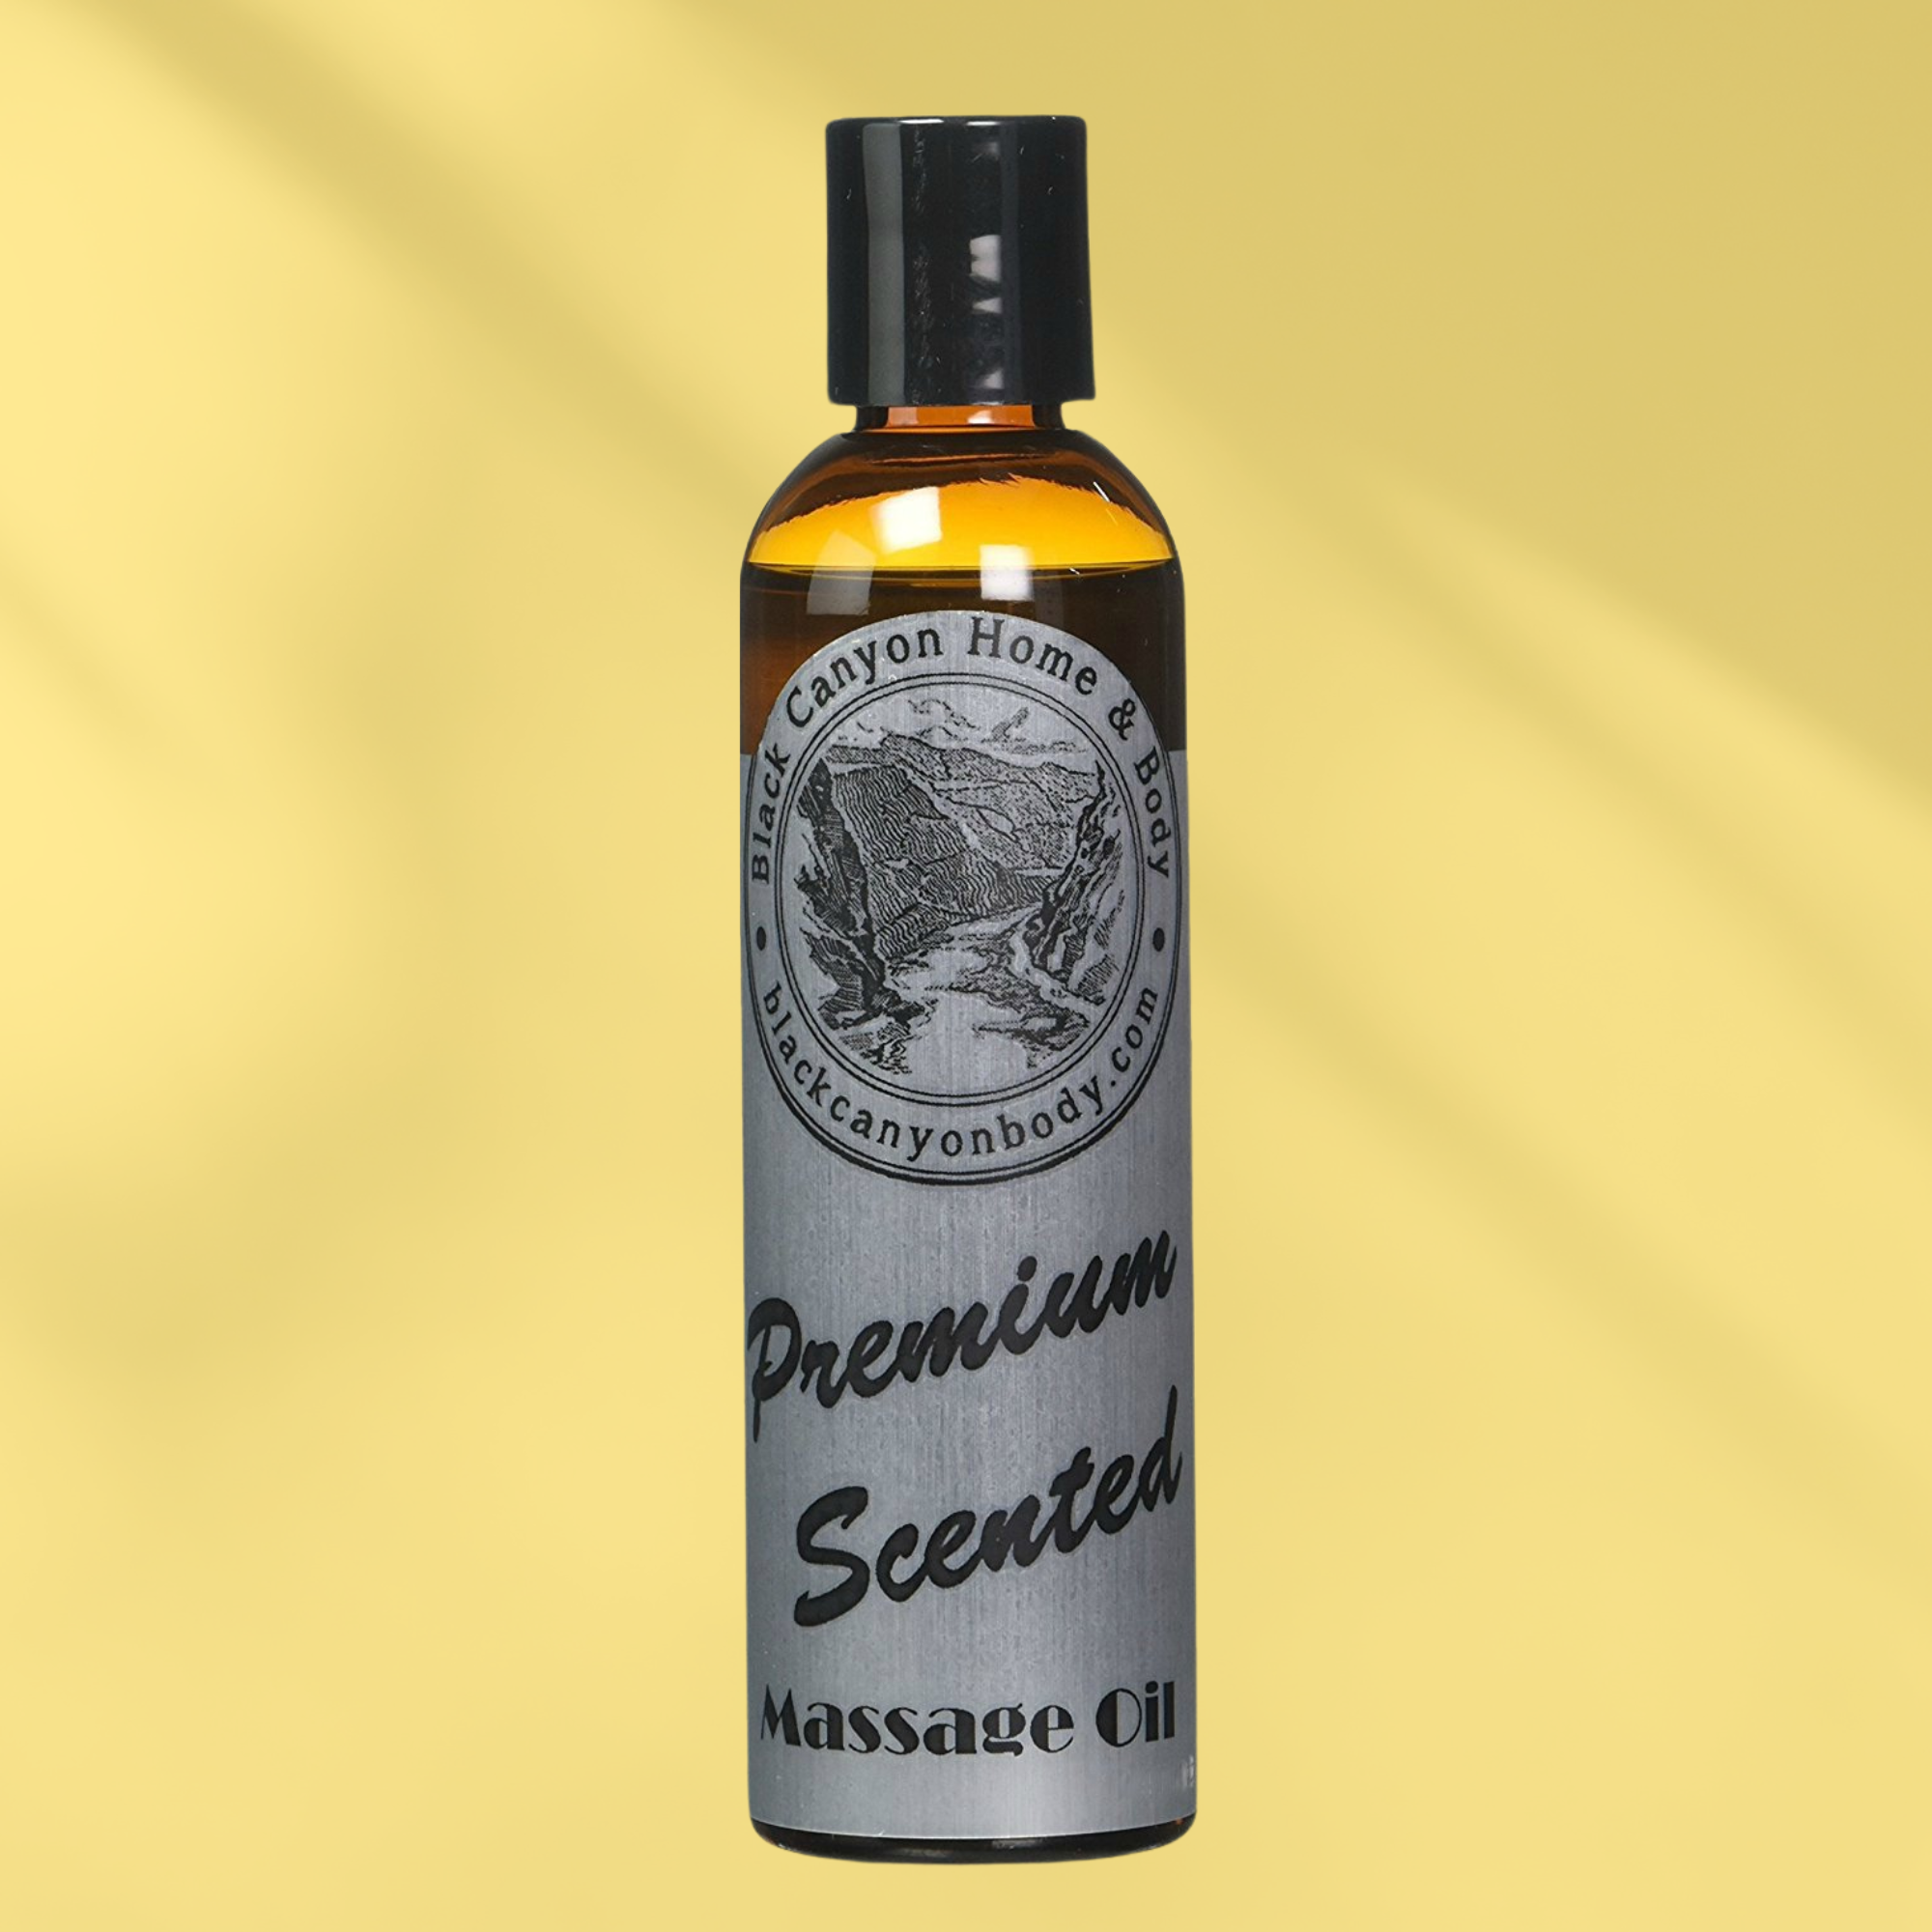 Black Canyon Gingerbread Scented Massage Oil